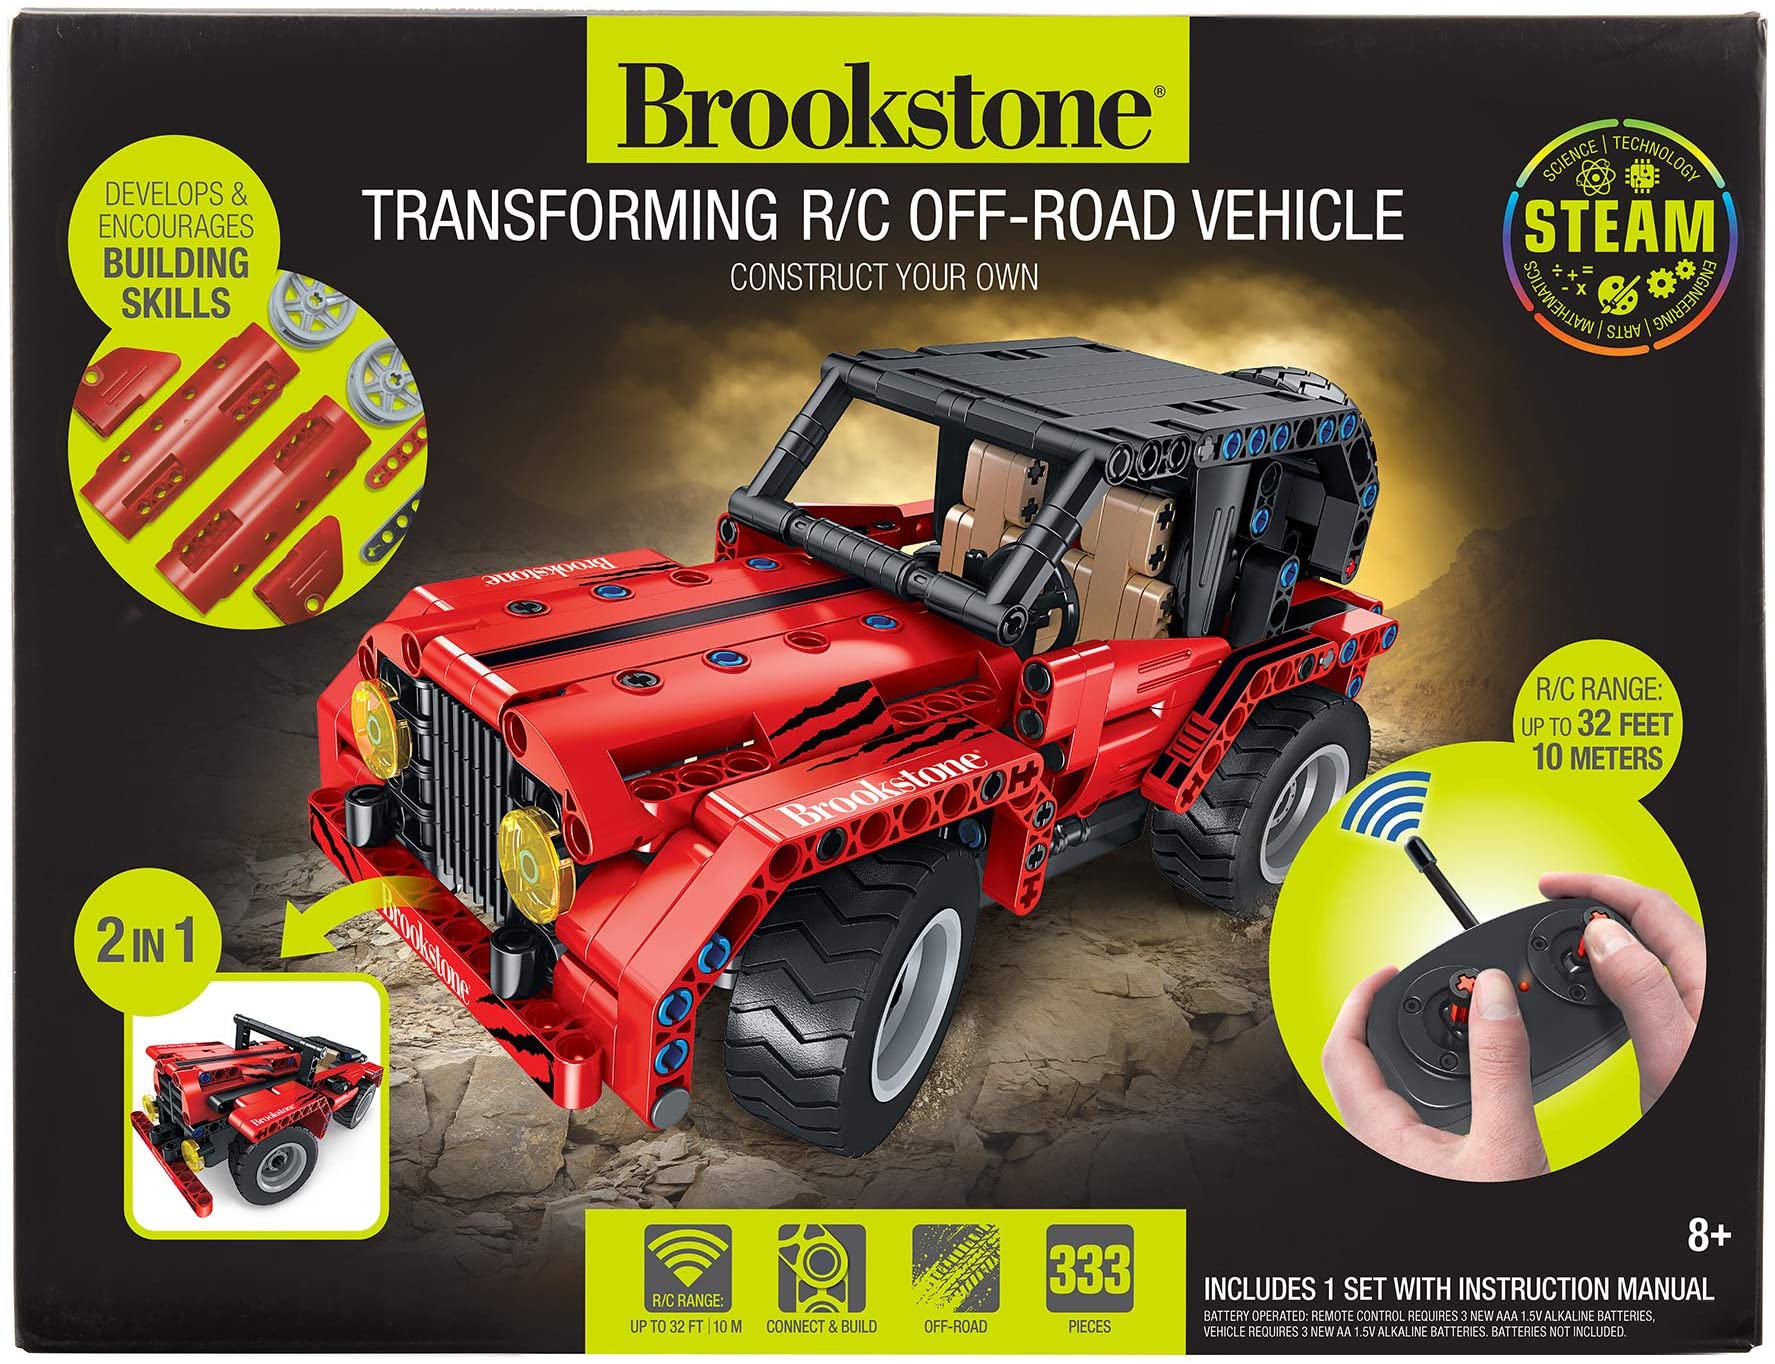 Brookstone Aged 8 Plus Diy Rc Car 2 In 1 Remote Control Car Kit Building Toy Sets